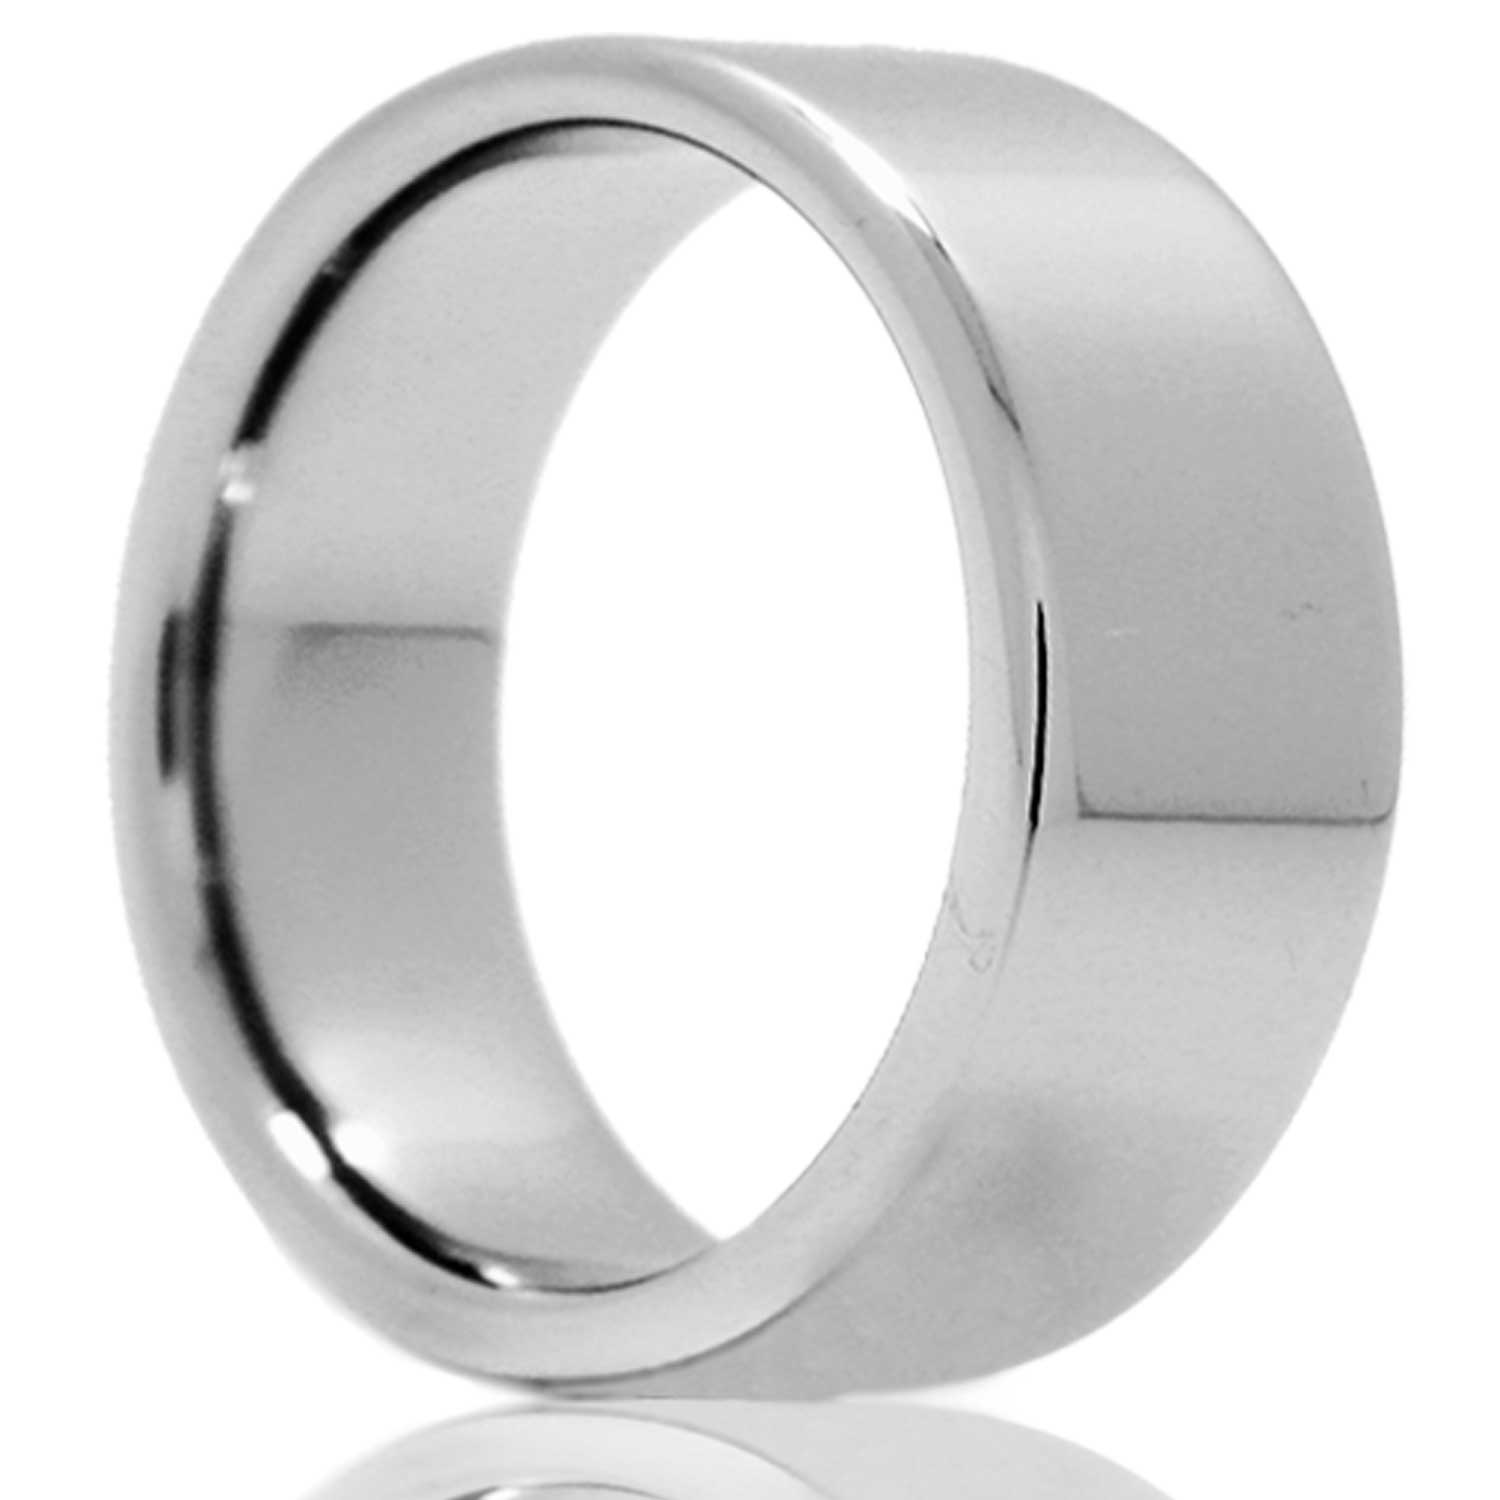 A classic cobalt wedding band displayed on a neutral white background.